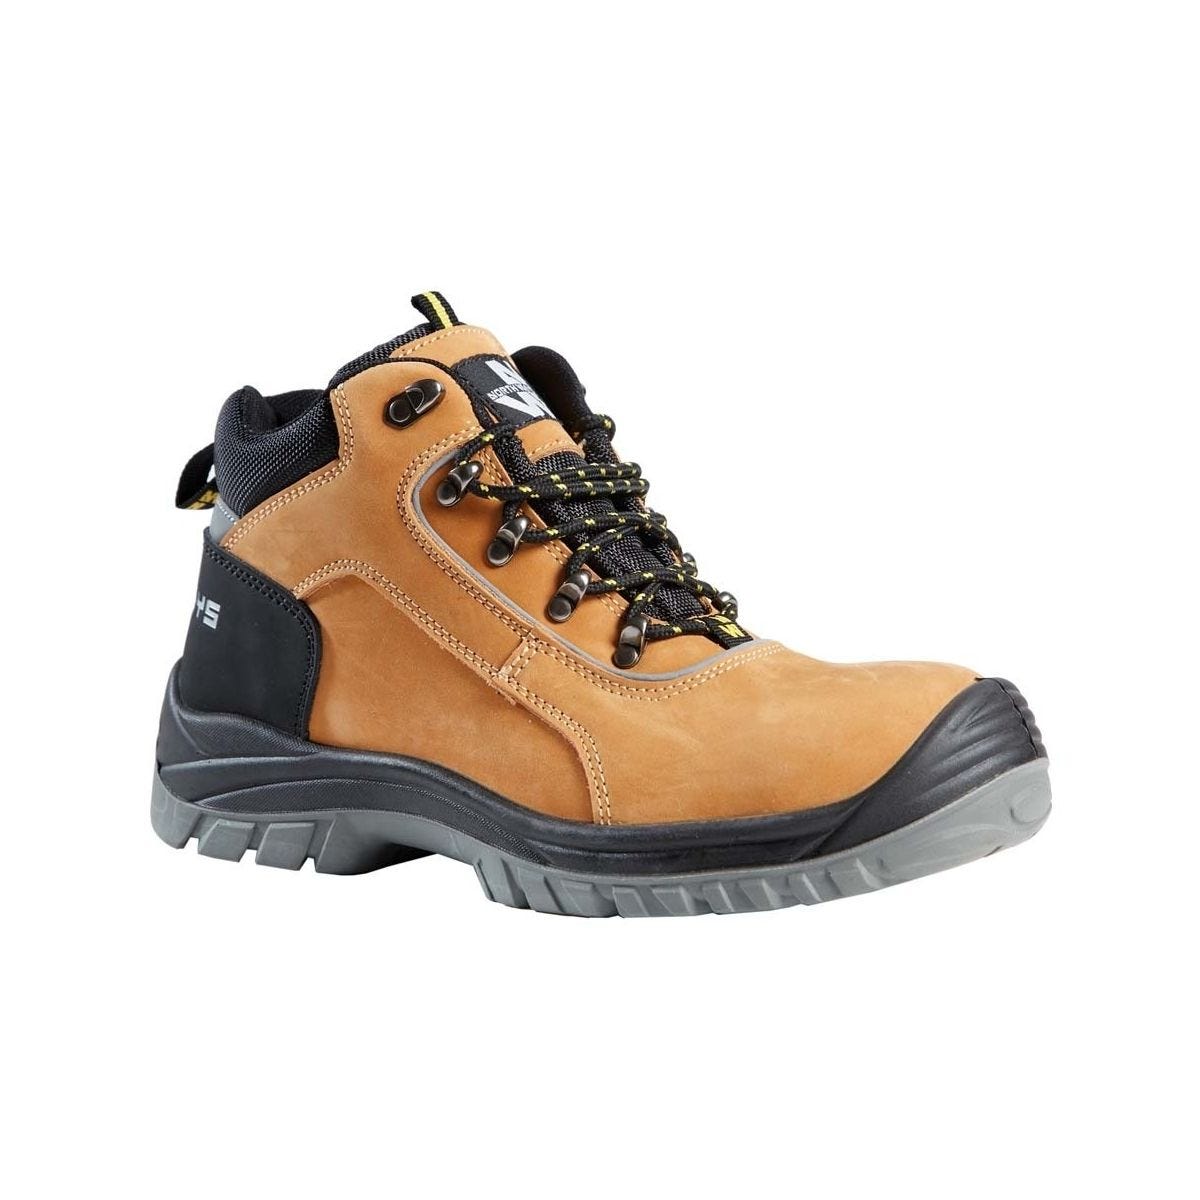 CHAUSSURES MONTANTES DE SECURITE RYAN CAMEL - NORTH WAYS - Taille 40 0